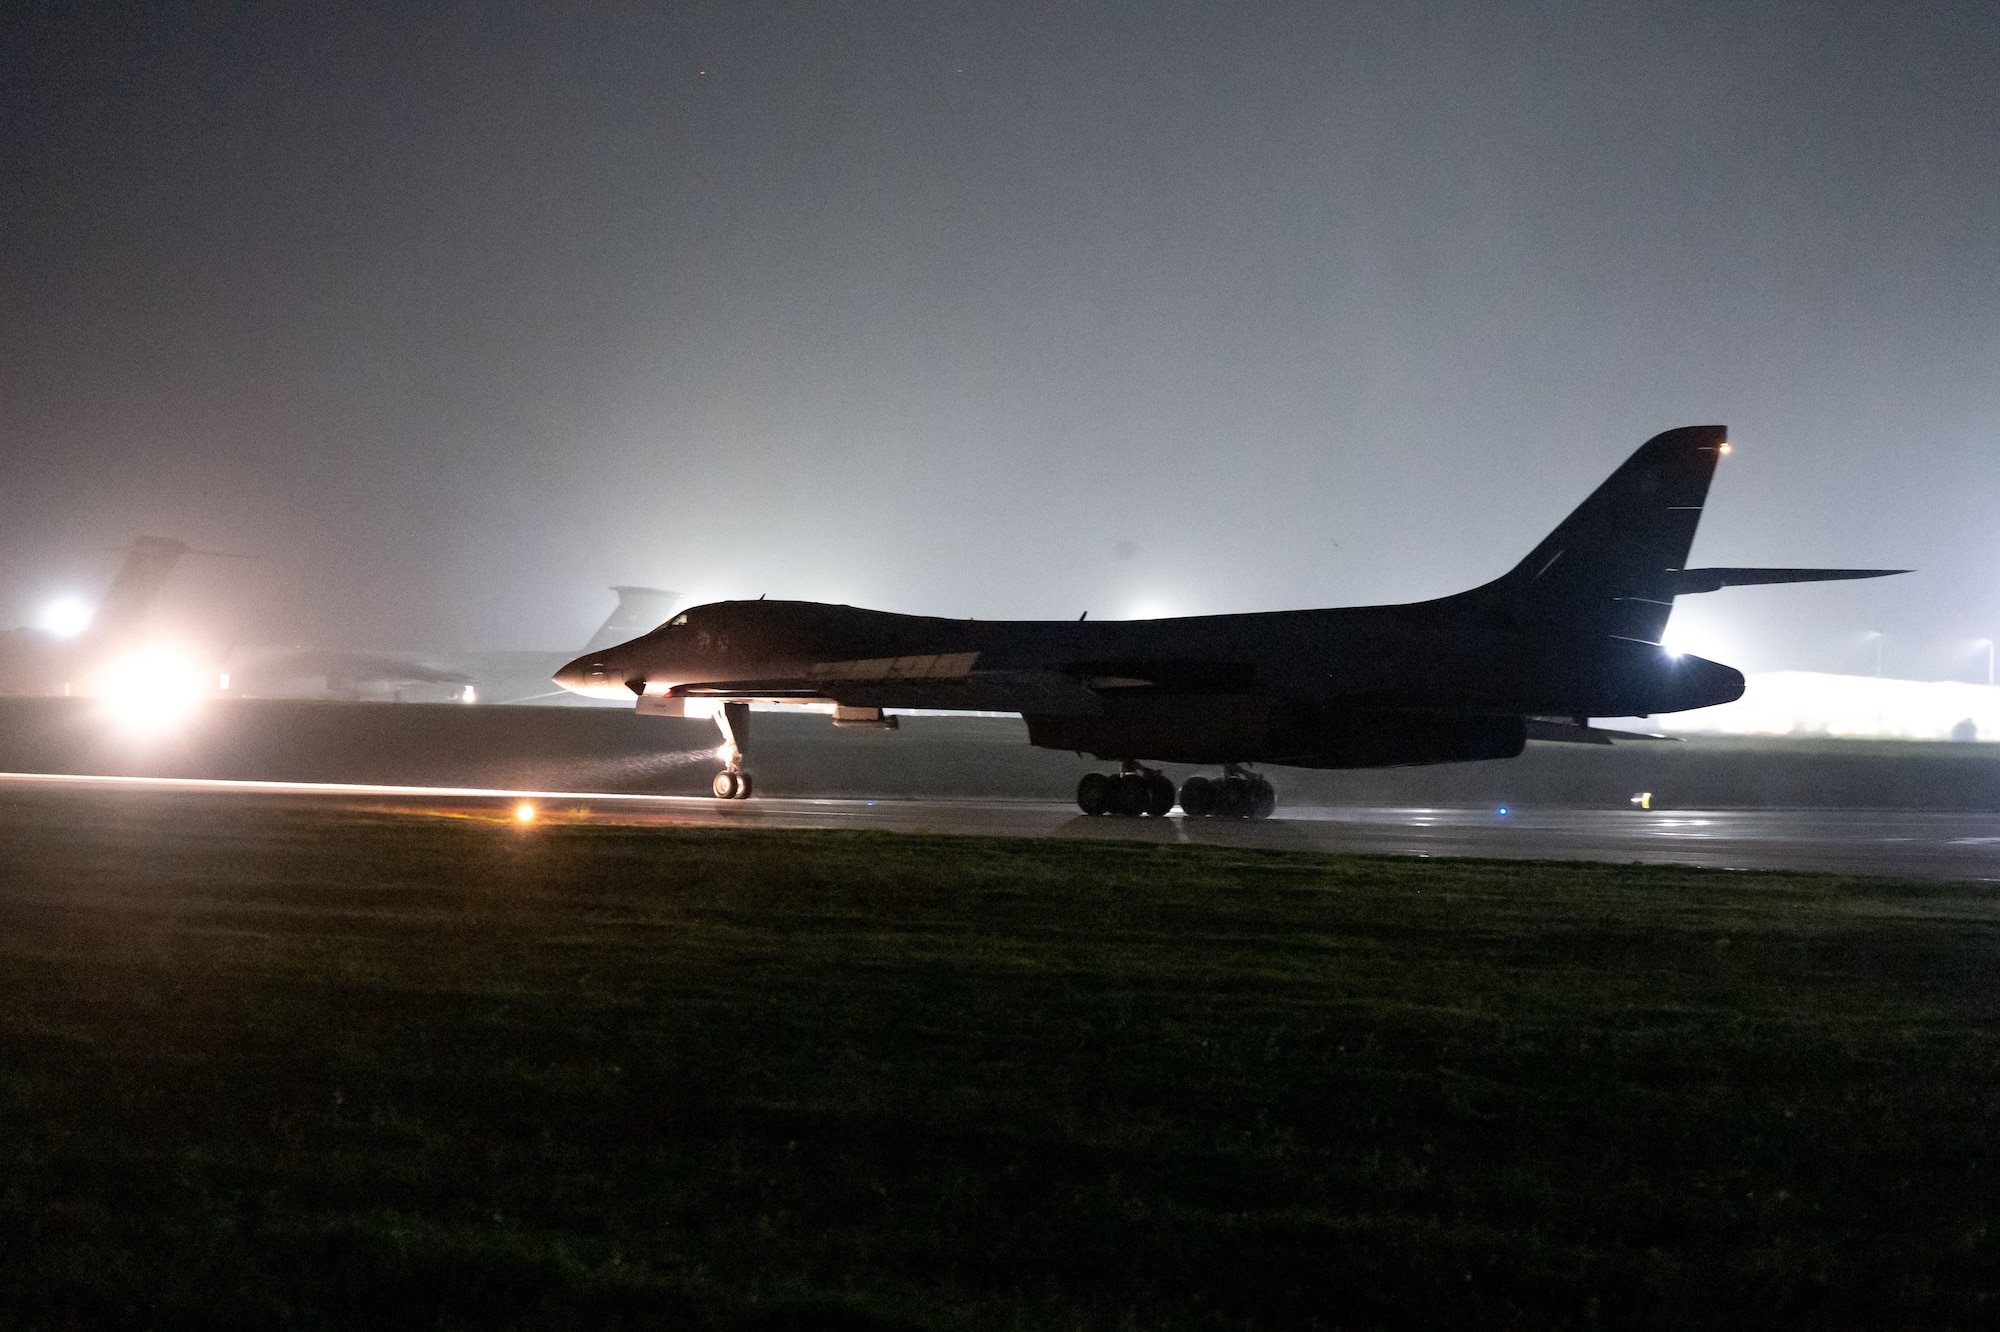 A U.S. Air Force B-1B Lancer assigned to the 37th Expeditionary Bomb Squadron, Ellsworth Air Force Base, South Dakota, lands at Andersen AFB, Guam, after a Bomber Task Force mission, Nov. 5, 2022. BTF missions are designed to showcase Pacific Air Force’s ability to deter, deny and dominate any influence or aggression from adversaries or competitors. (U.S. Air Force photo by Staff Sgt. Hannah Malone)